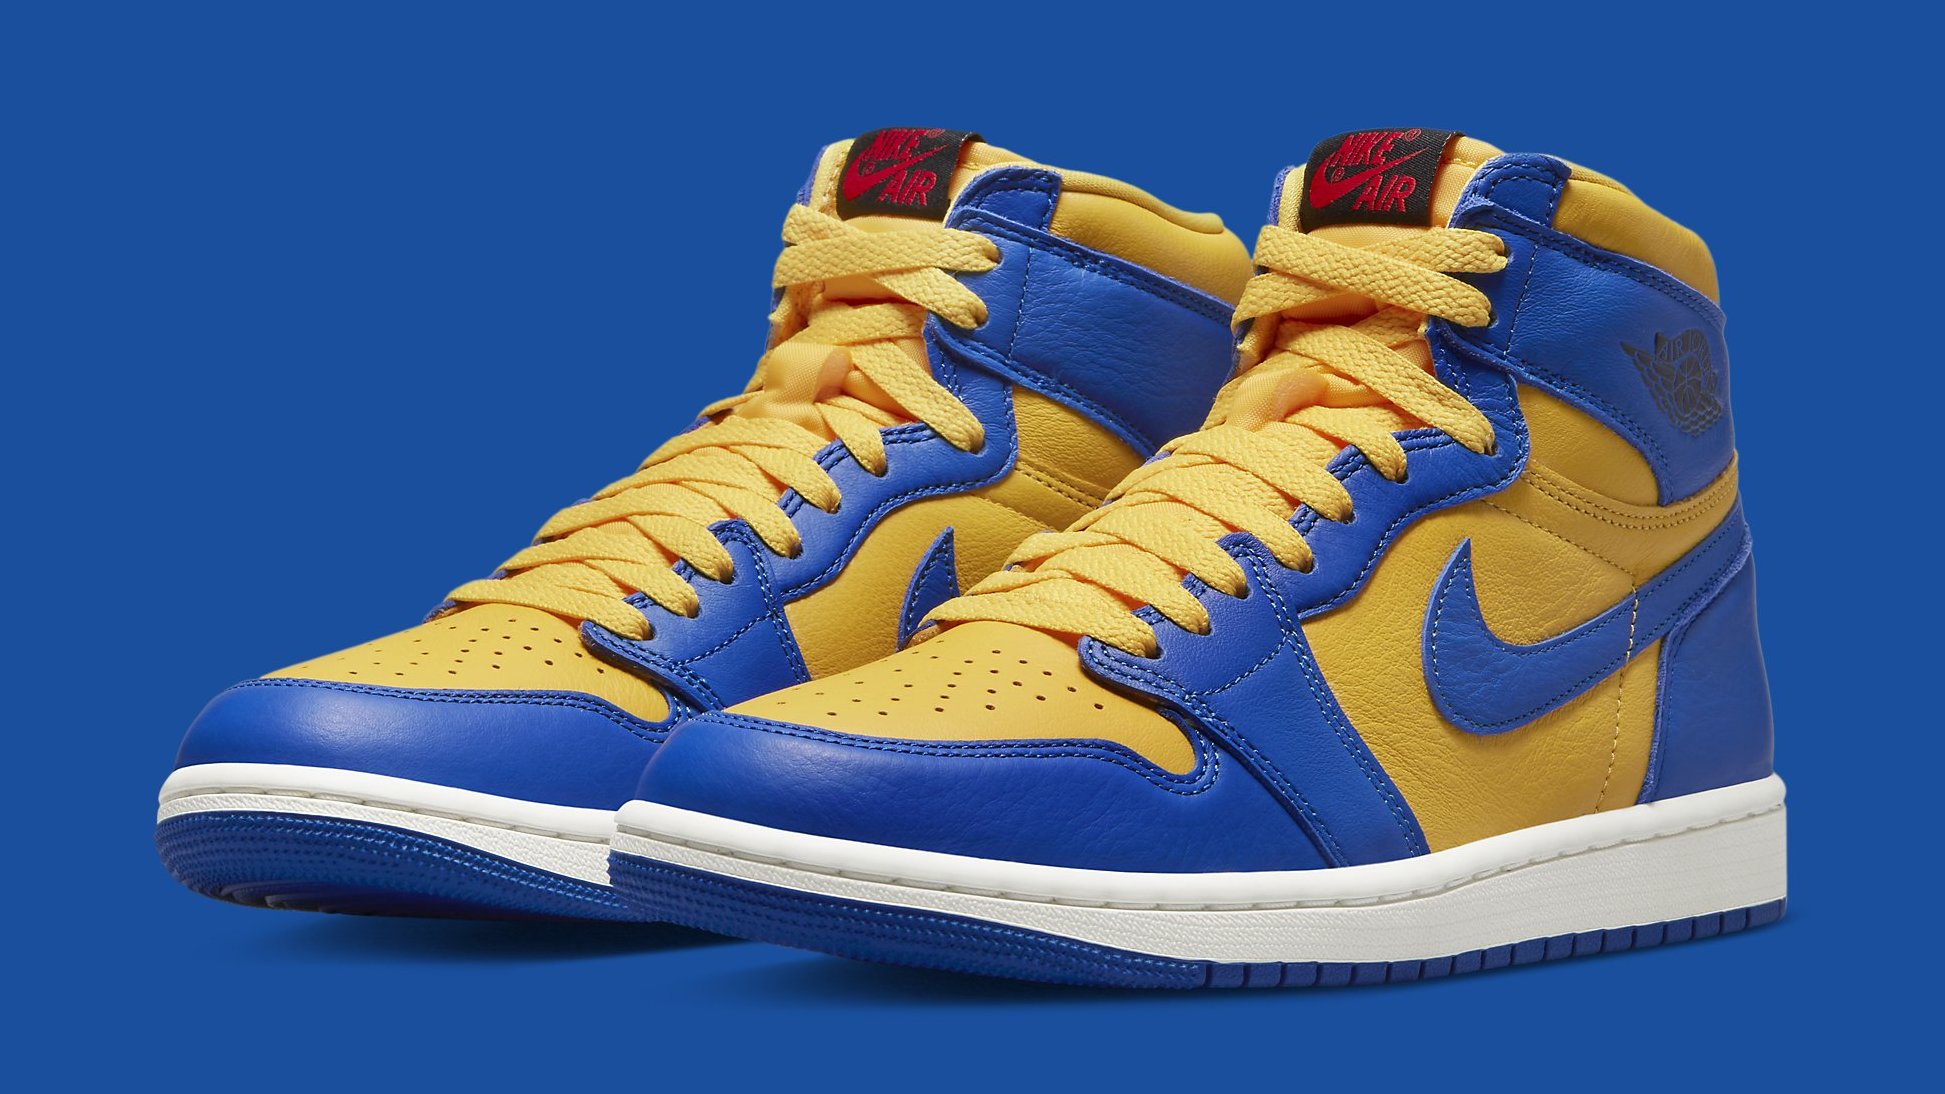 blue yellow and red jordans